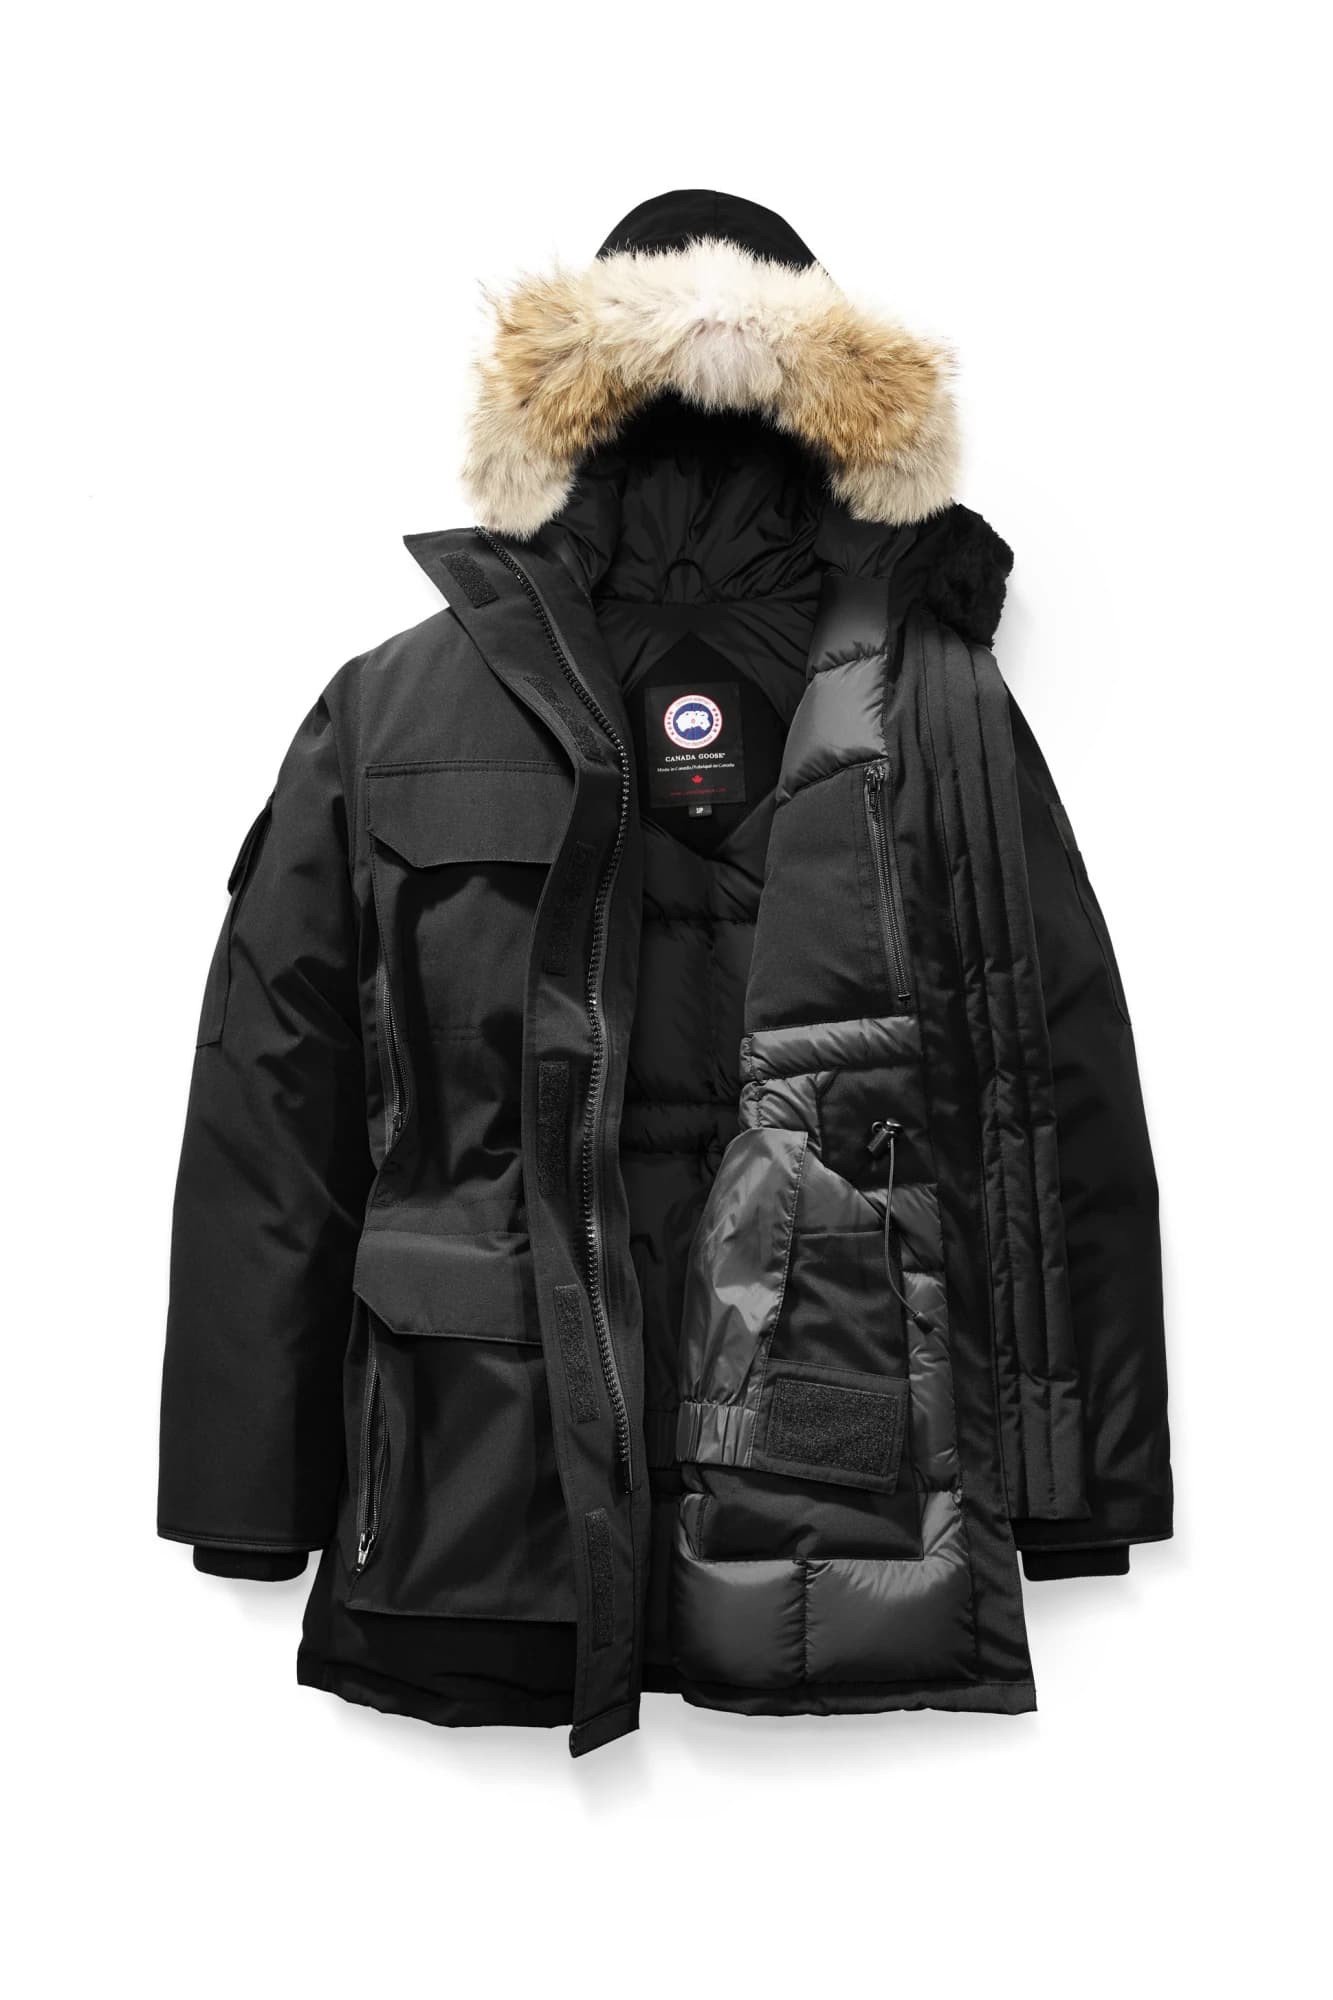 Canada Goose Women's Expedition Parka - Black - XS